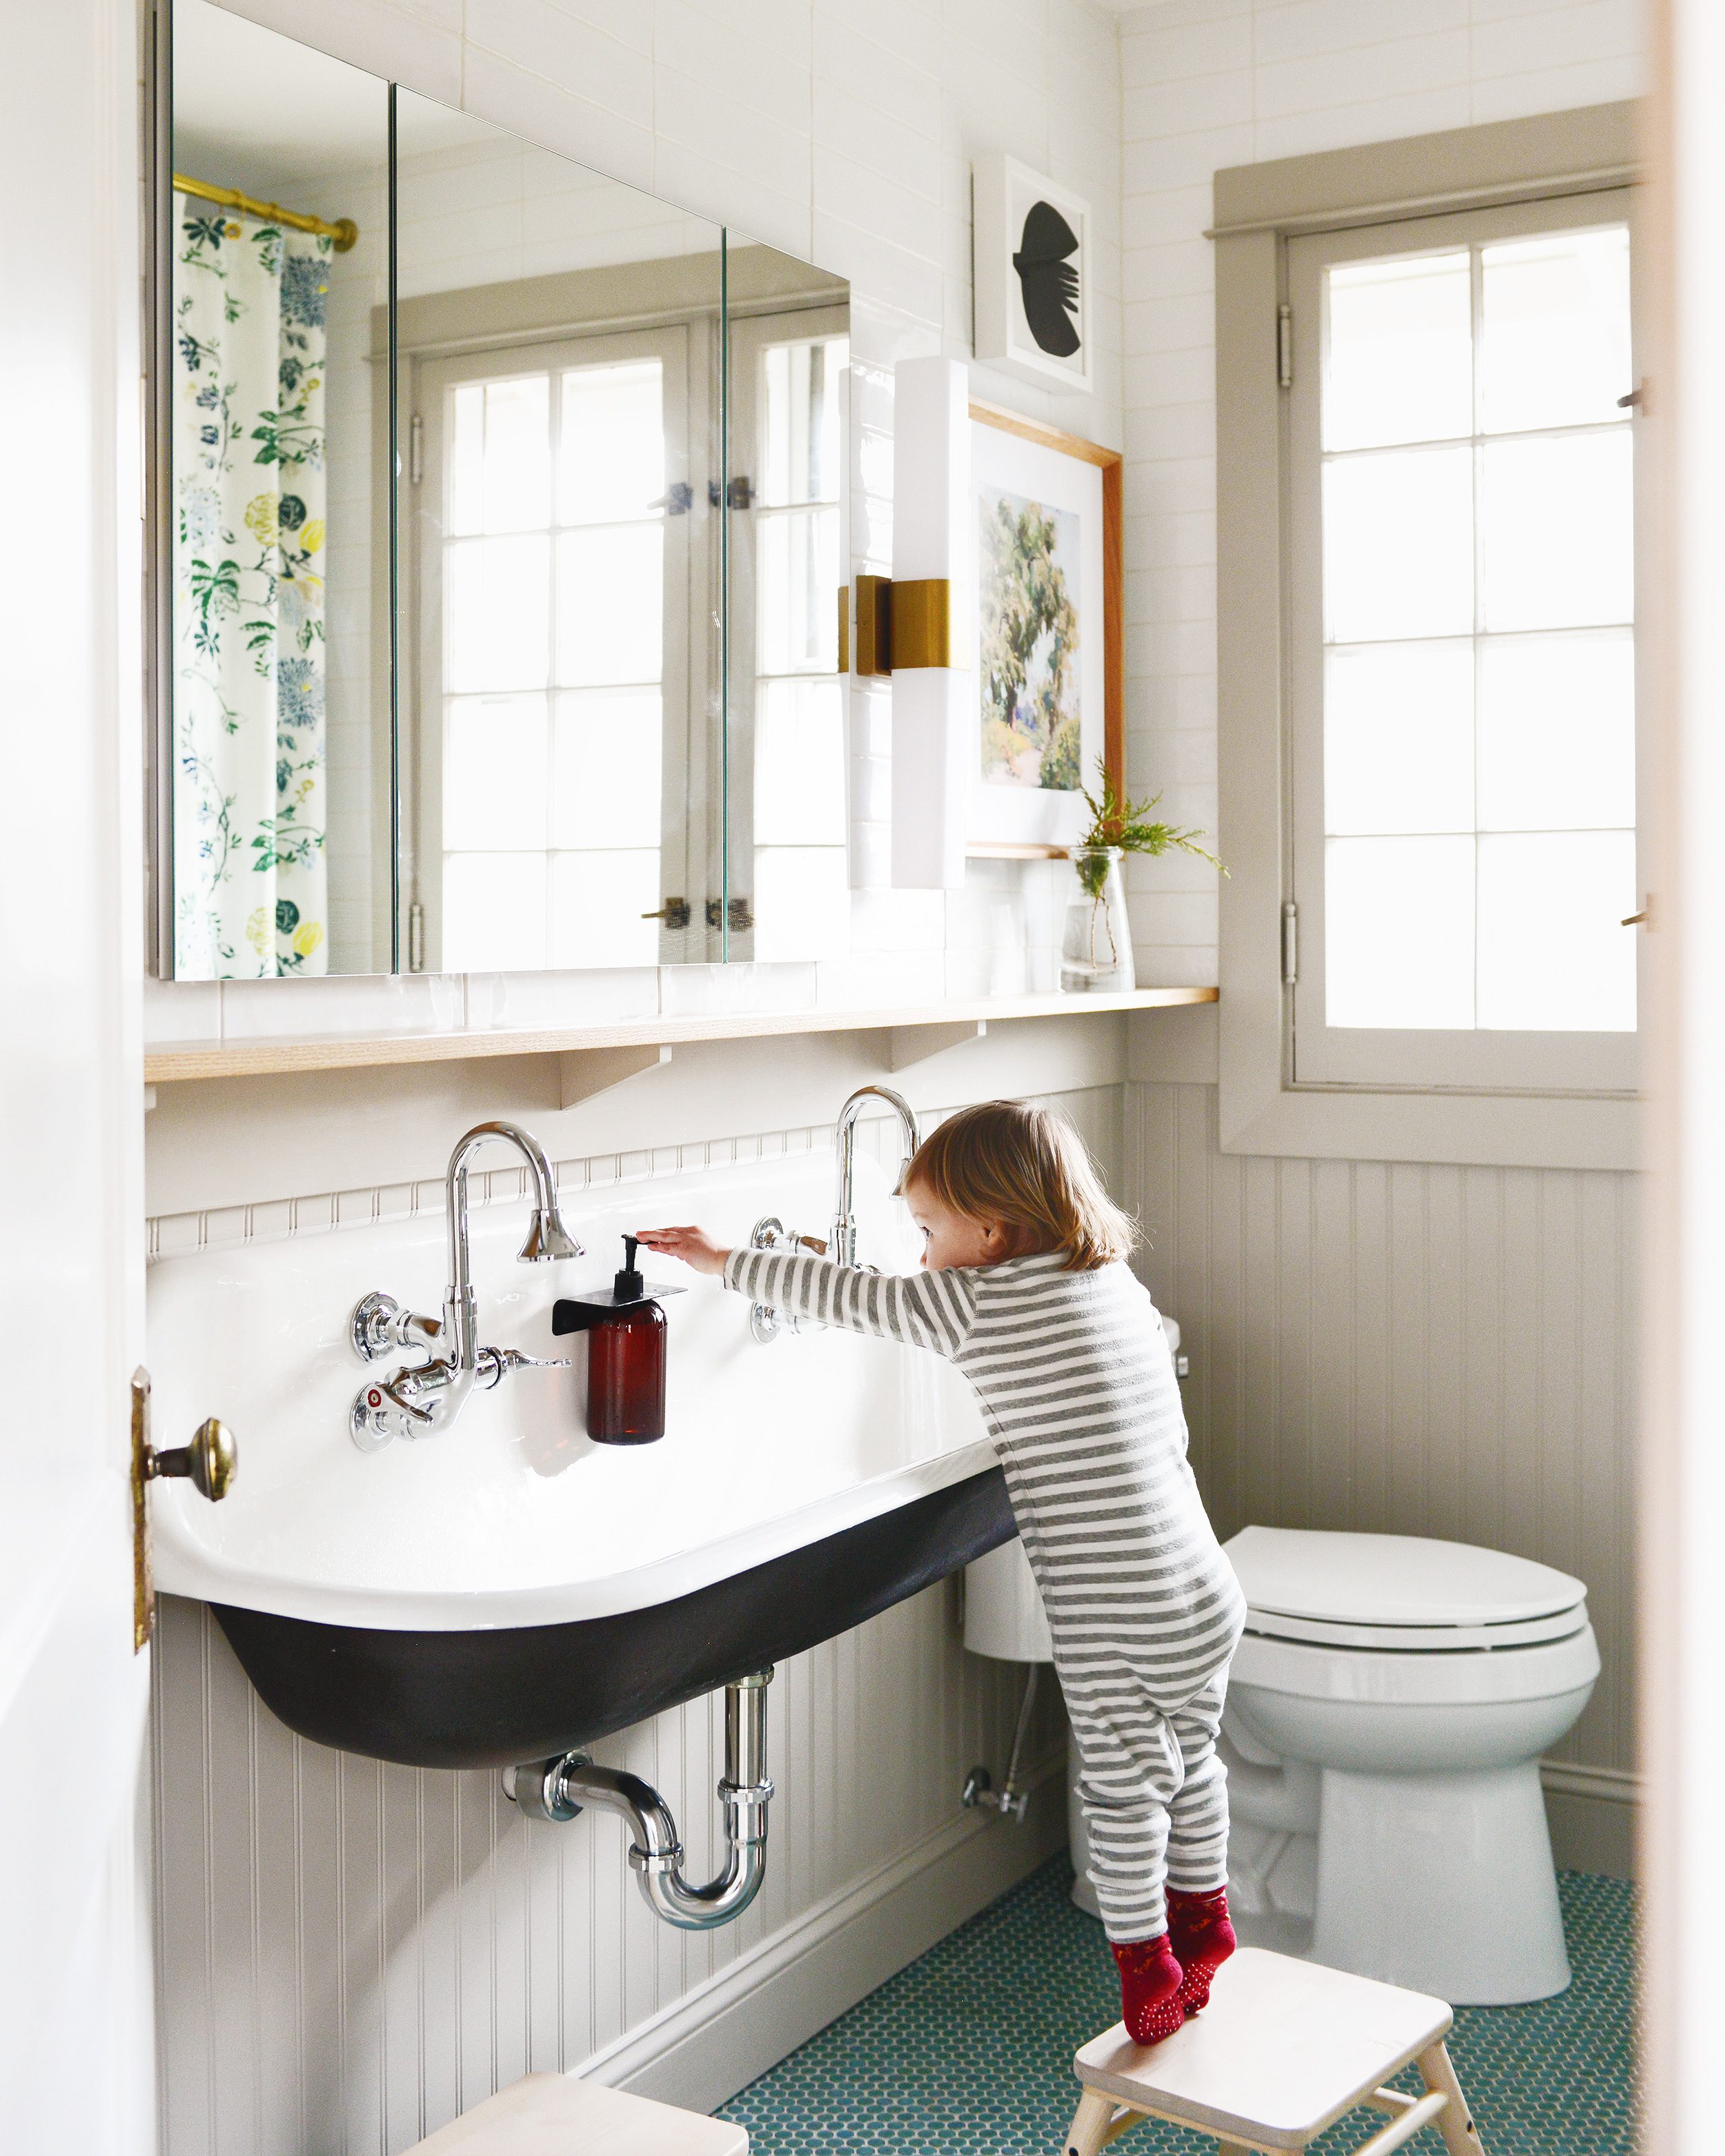 Lucy stands on a step stool in a neutral bathroom, reaching for the soap pump. The walls are beadboard and the floor is green penny tile. via Yellow Brick Home